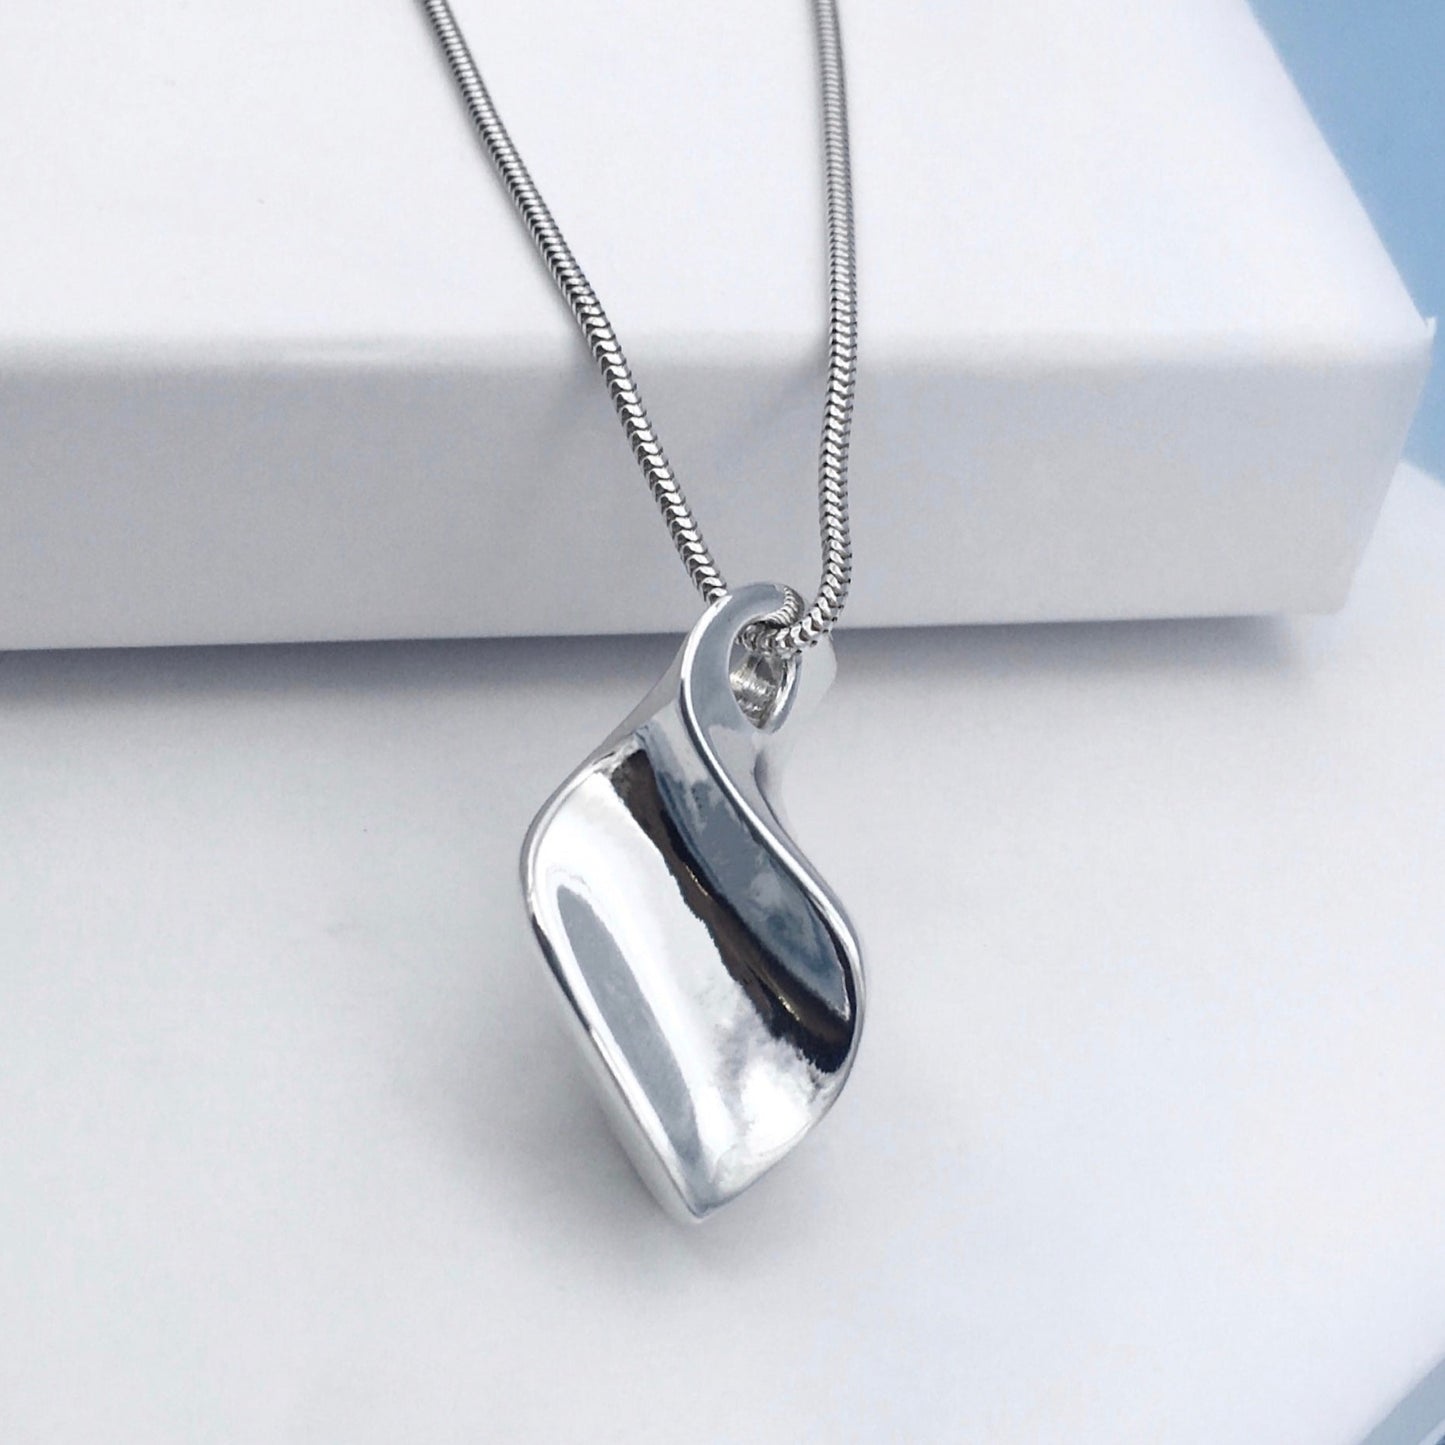 3D Diamond Shaped Solid Sterling Silver Pendant